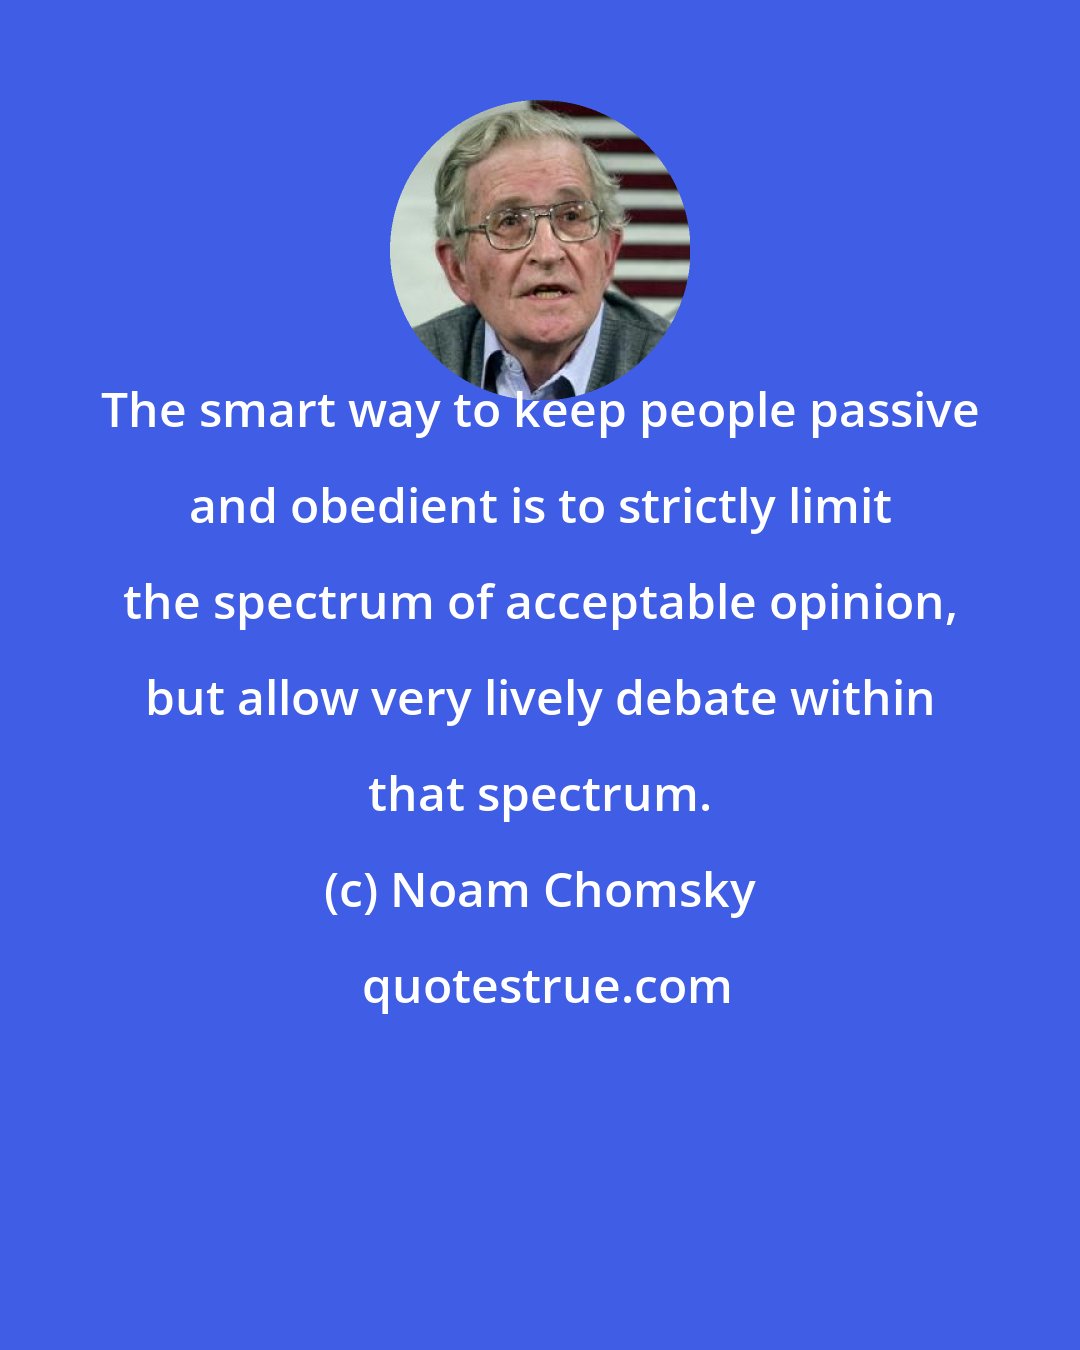 Noam Chomsky: The smart way to keep people passive and obedient is to strictly limit the spectrum of acceptable opinion, but allow very lively debate within that spectrum.